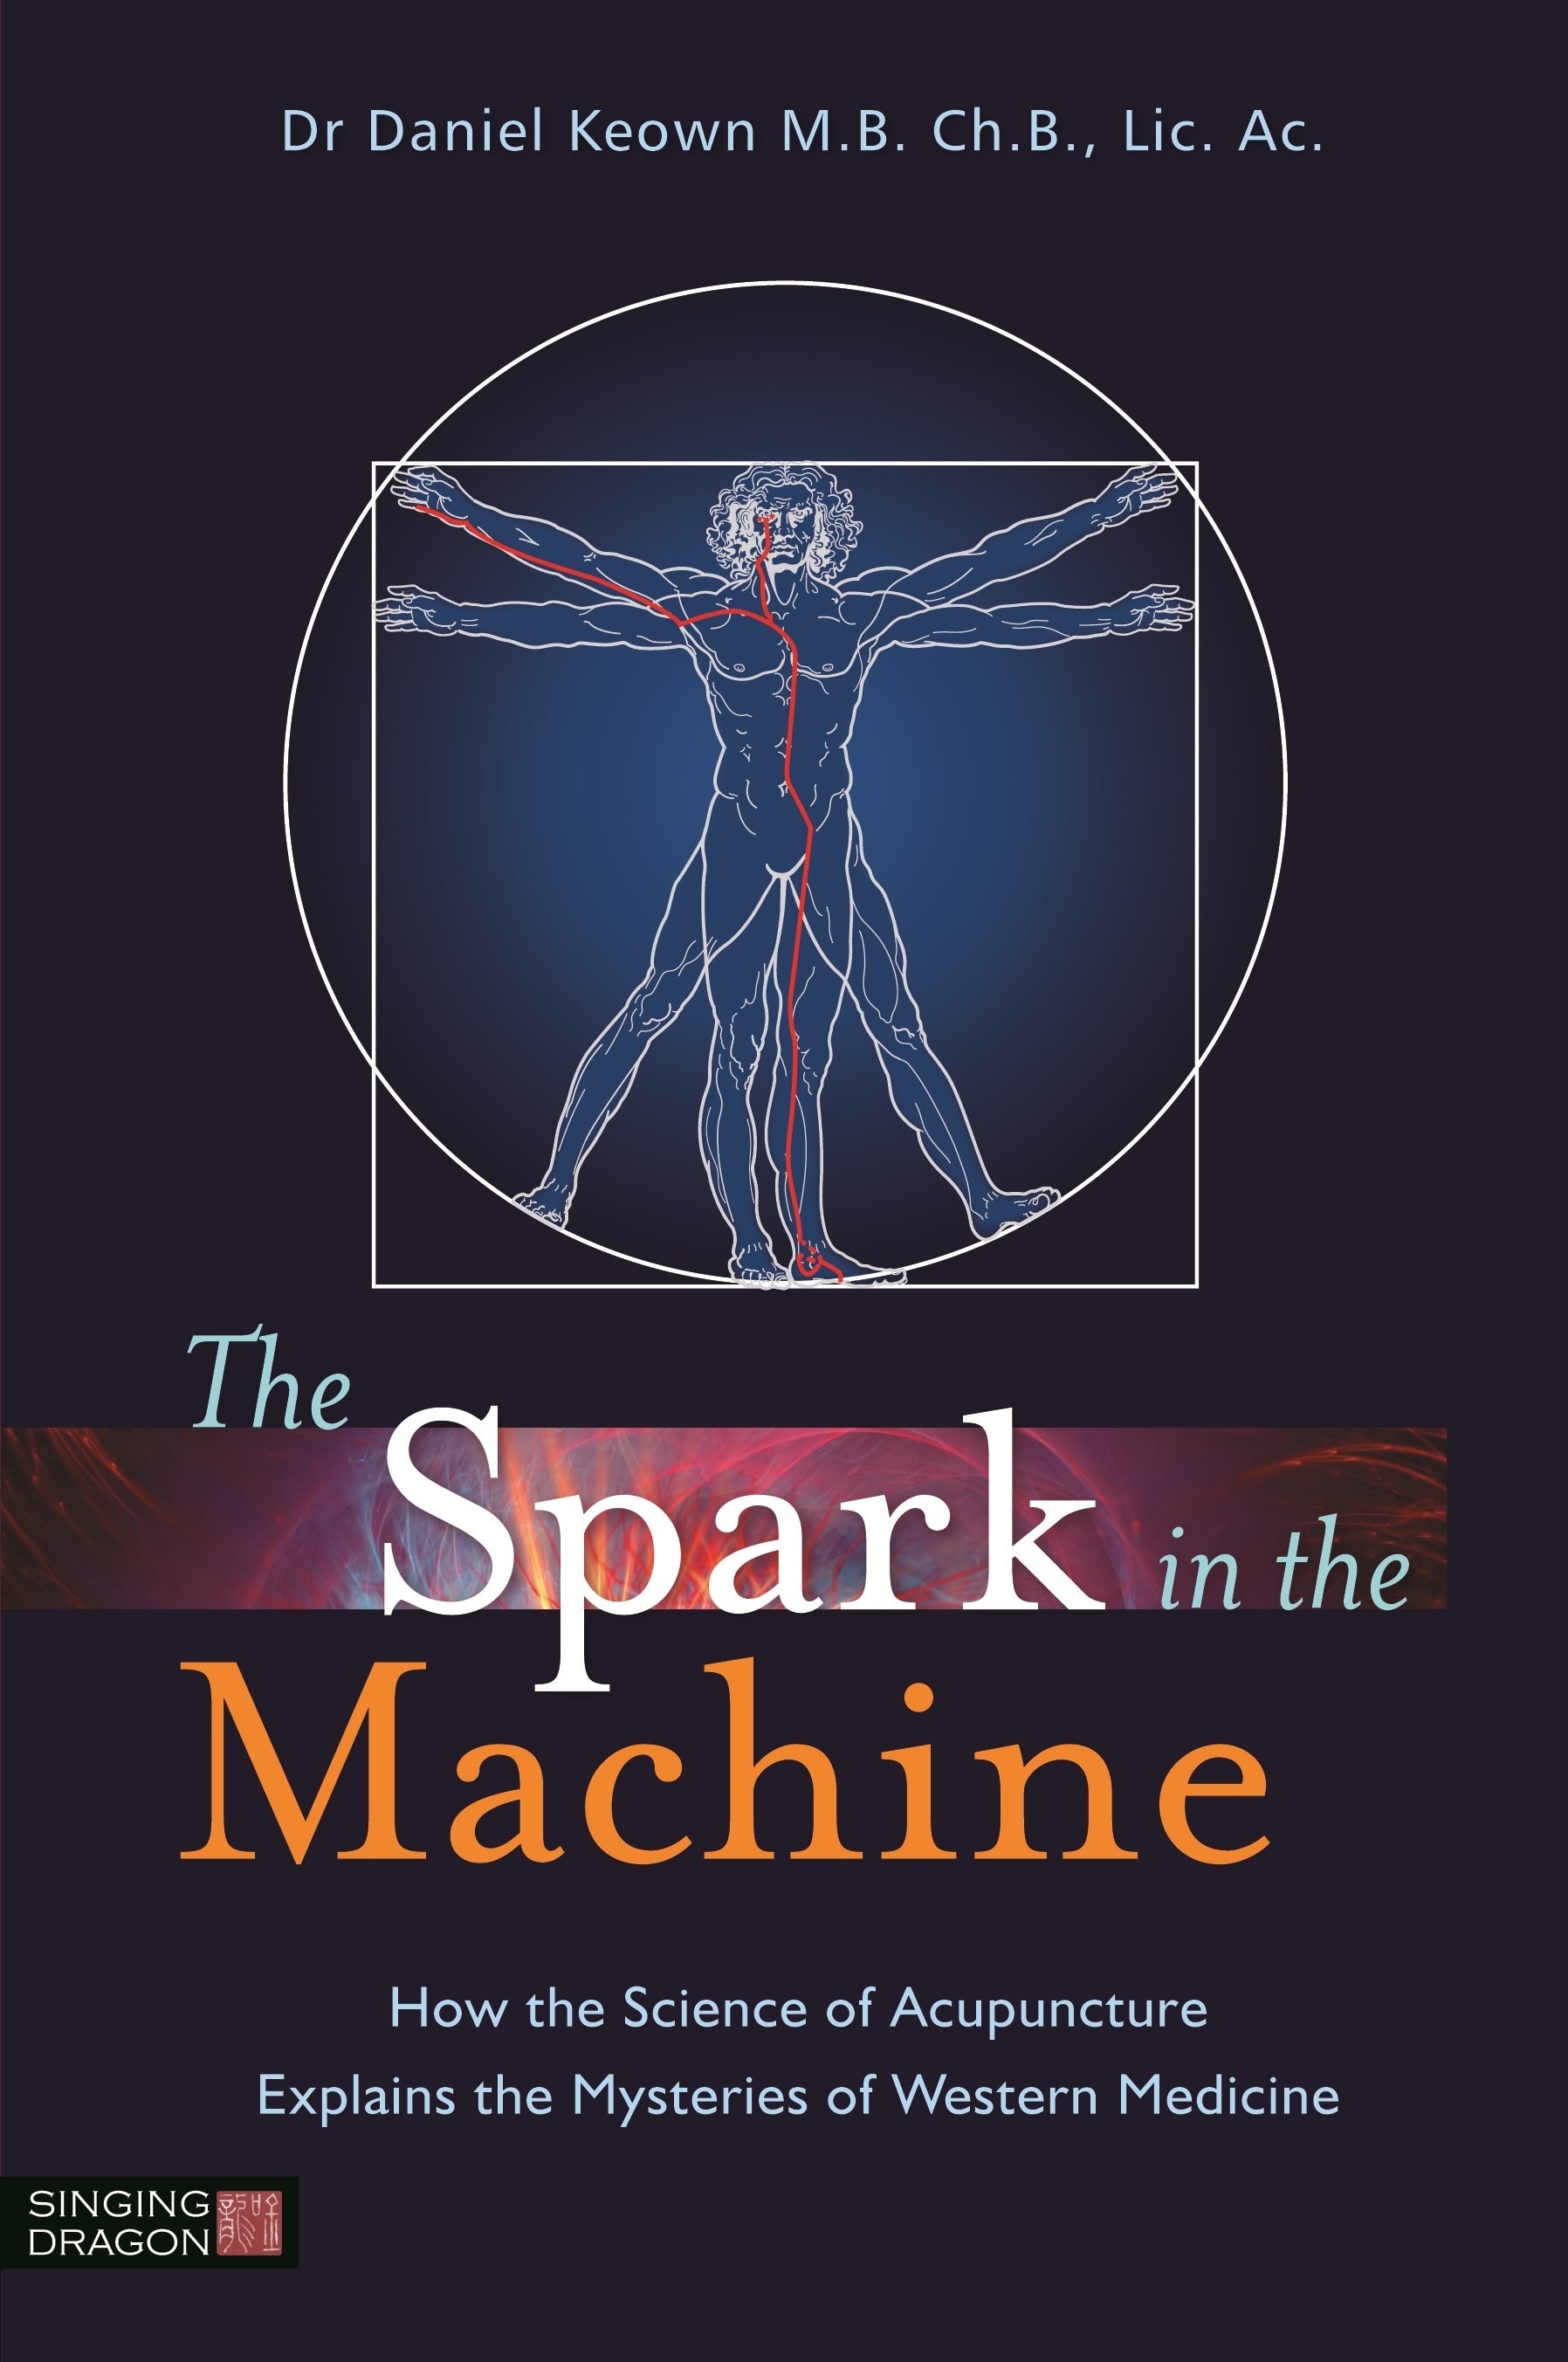 The Spark in the Machine by Daniel Keown